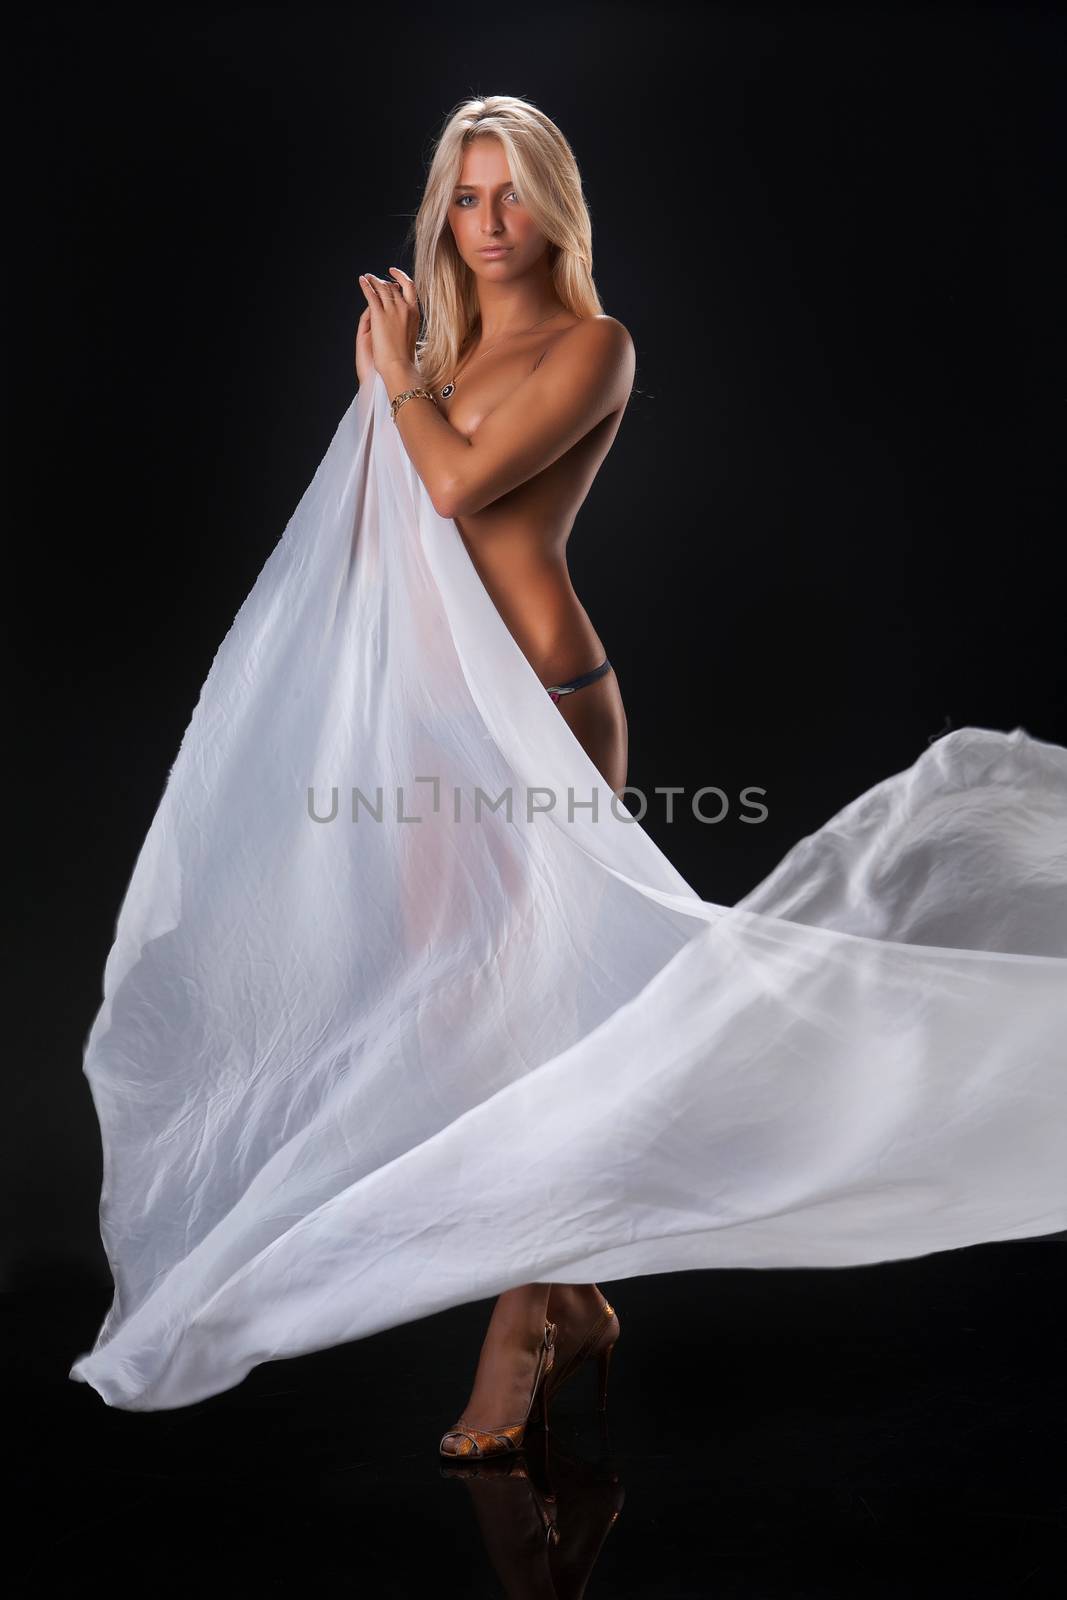 Young topless blonde woman with a waving white fabric on black reflecting background